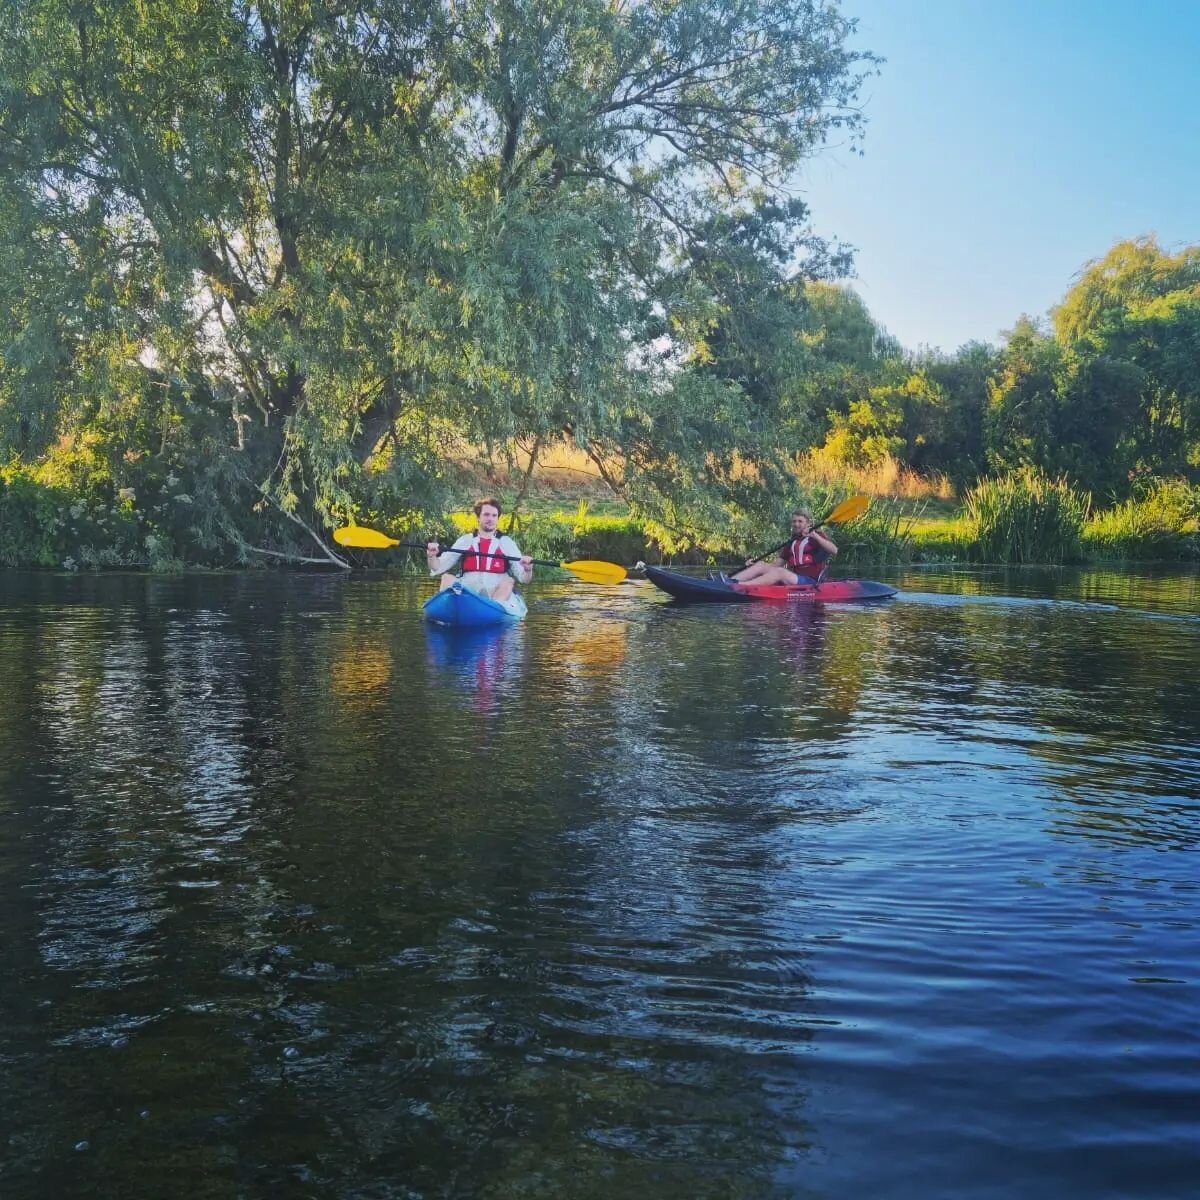 We can't resist having a paddle ourselves every now and then 🛶☀️🌳

#riverstour 
#sudburysuffolk 
#suffolk 
#Essex 
#kayaking 
#summerfun 
#summerholidays